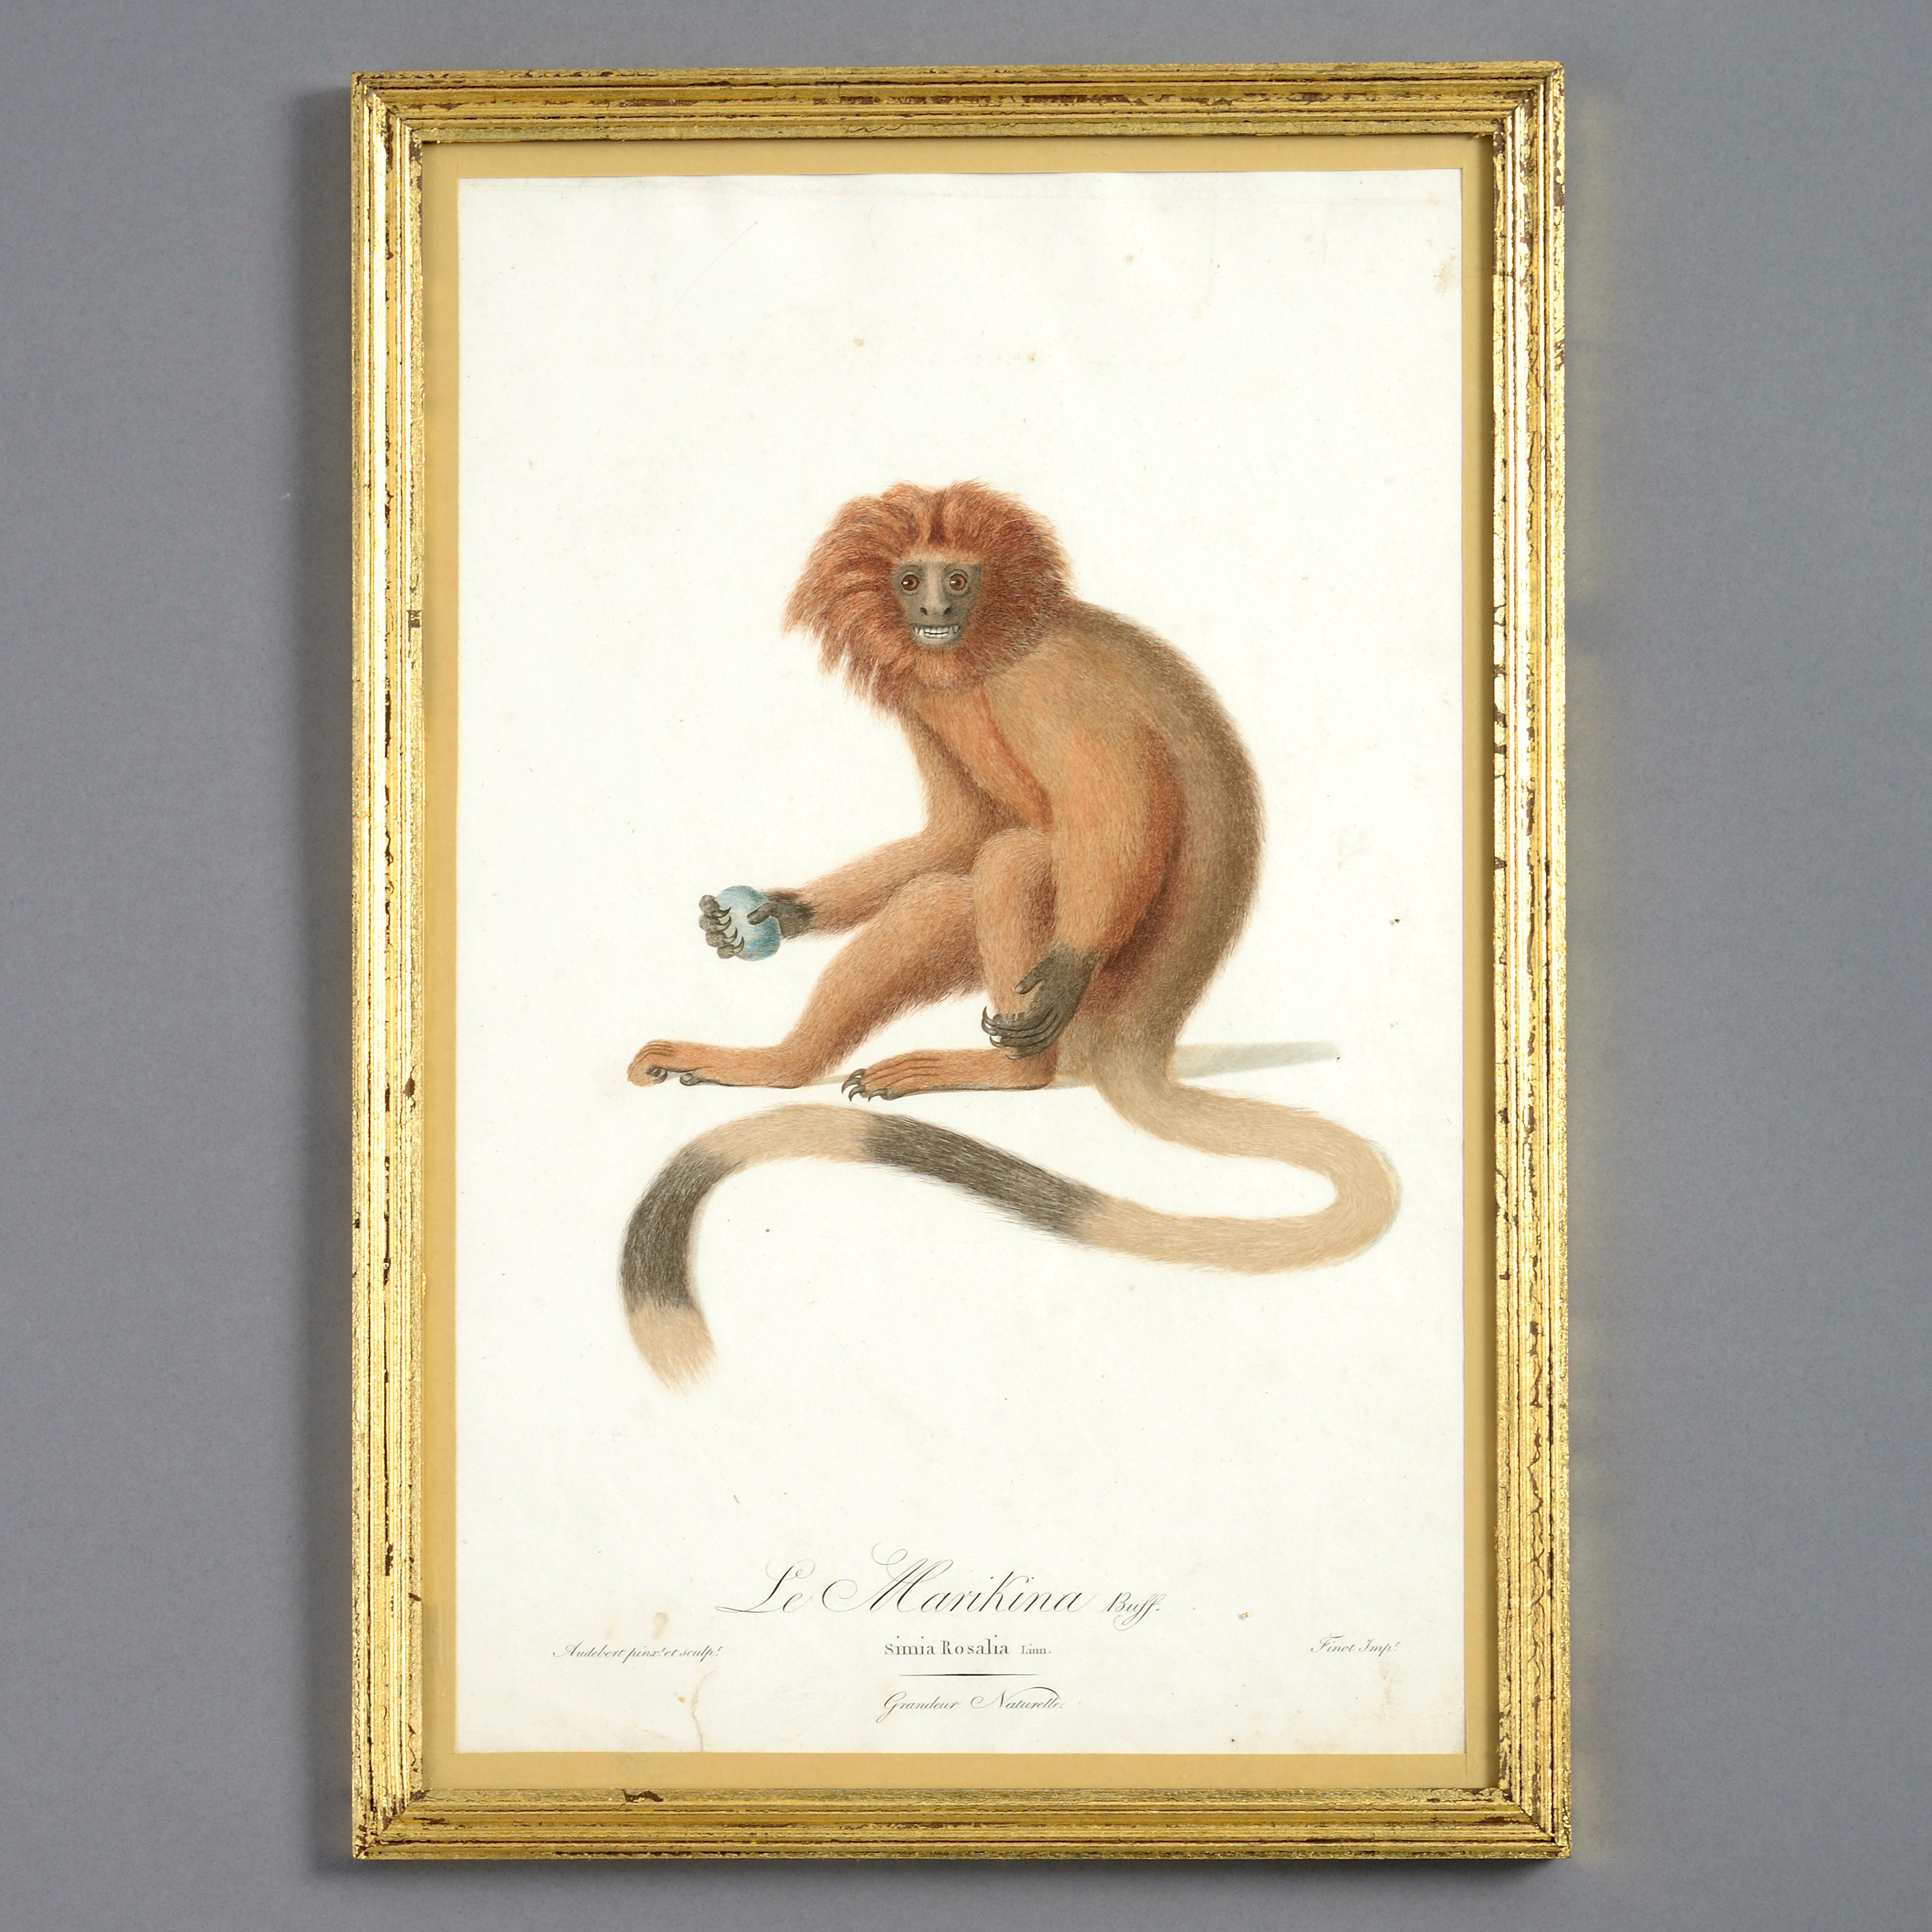 Four Late 18th Century Hand-coloured Monkey Engravings - Naturalistic Print by Unknown